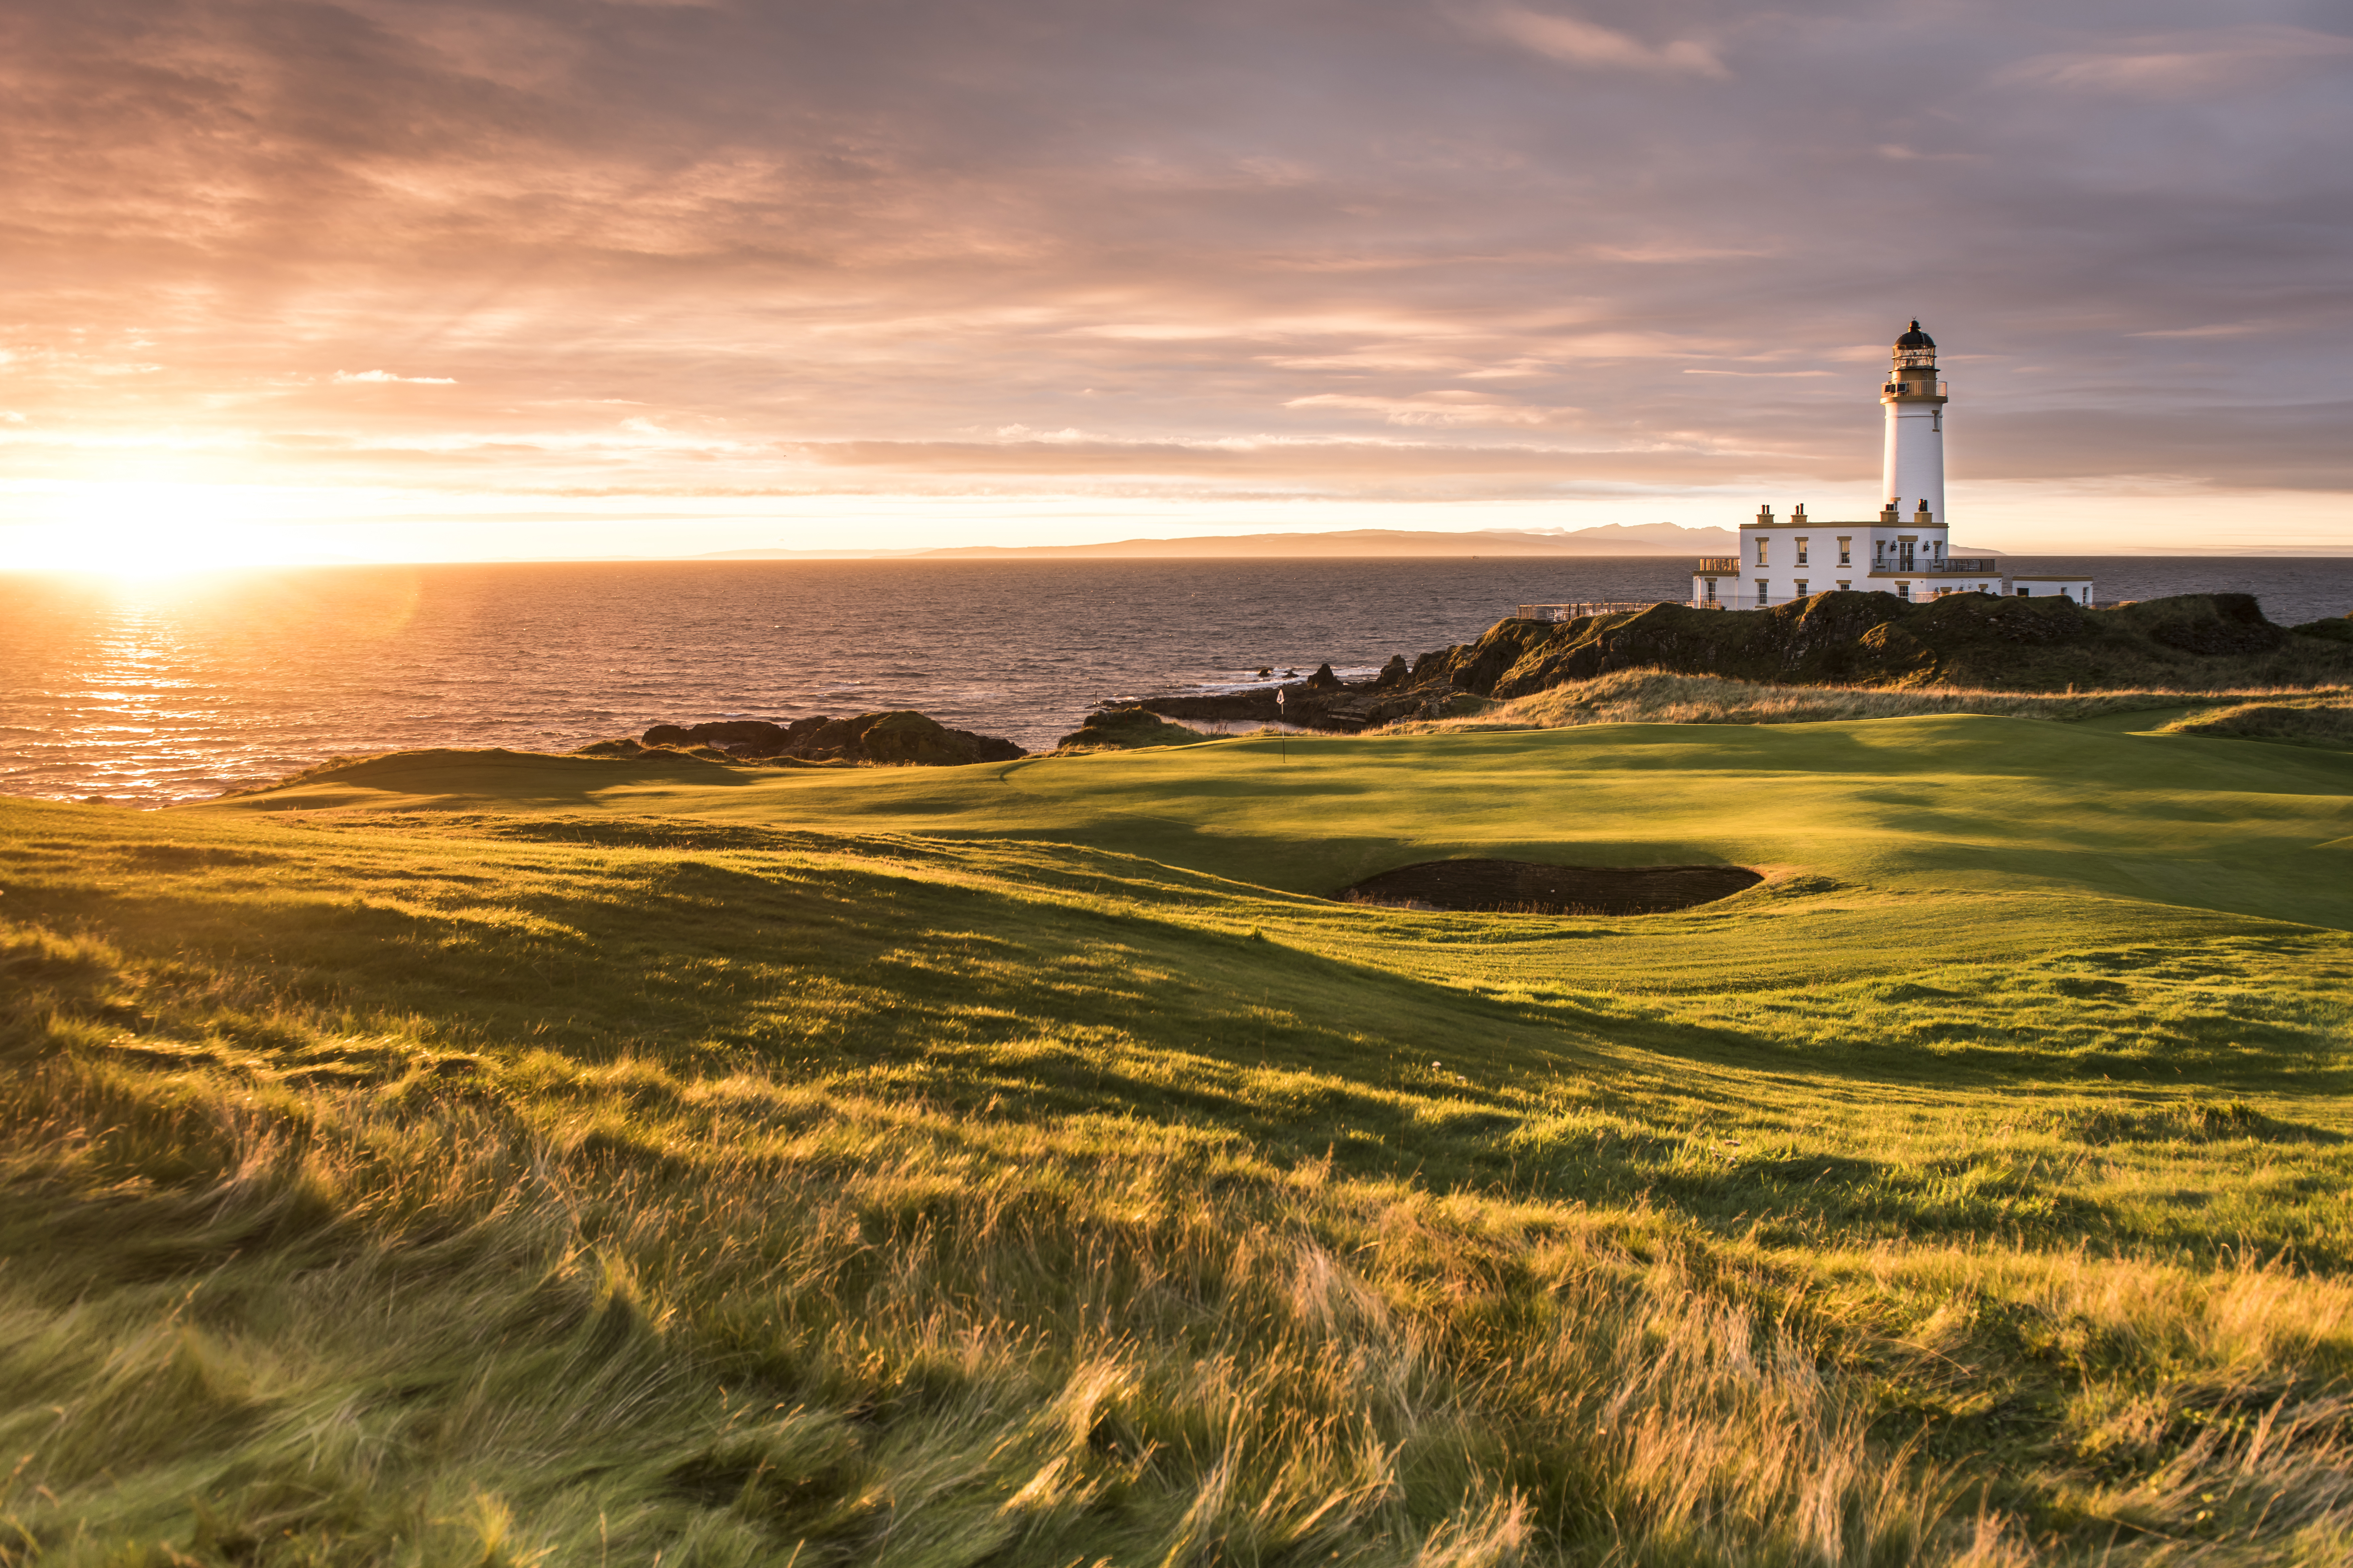 TURNBERRY GOLF COURSE